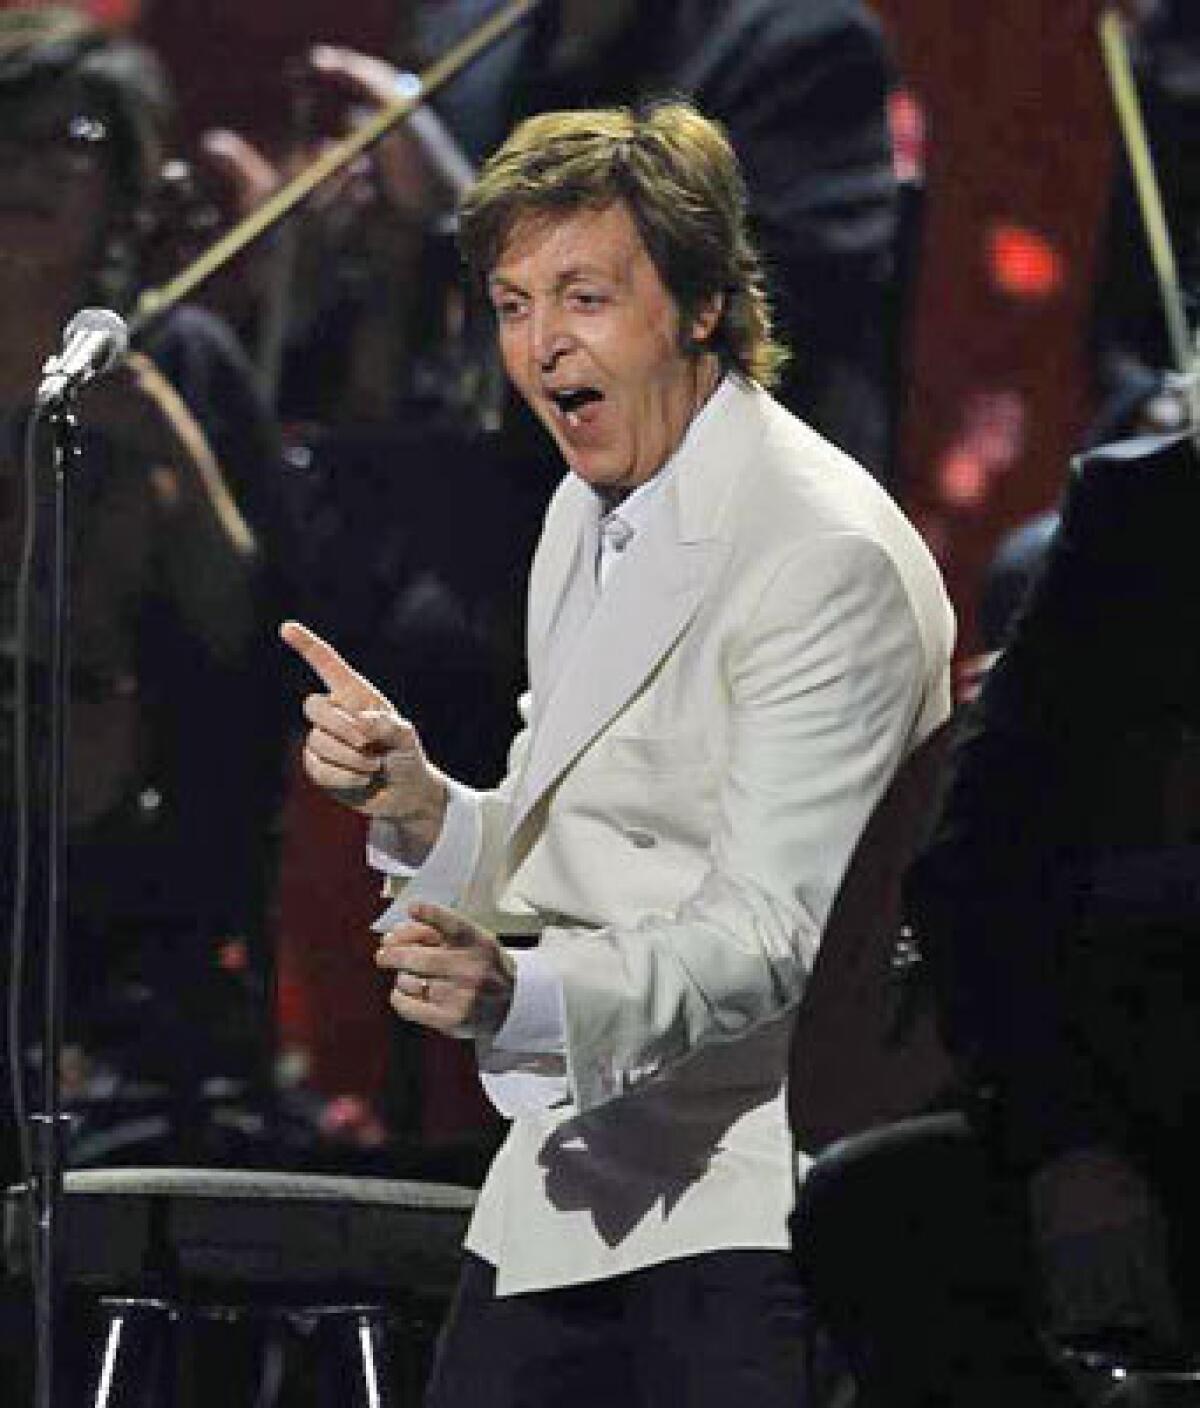 Paul McCartney at the Grammys in February.